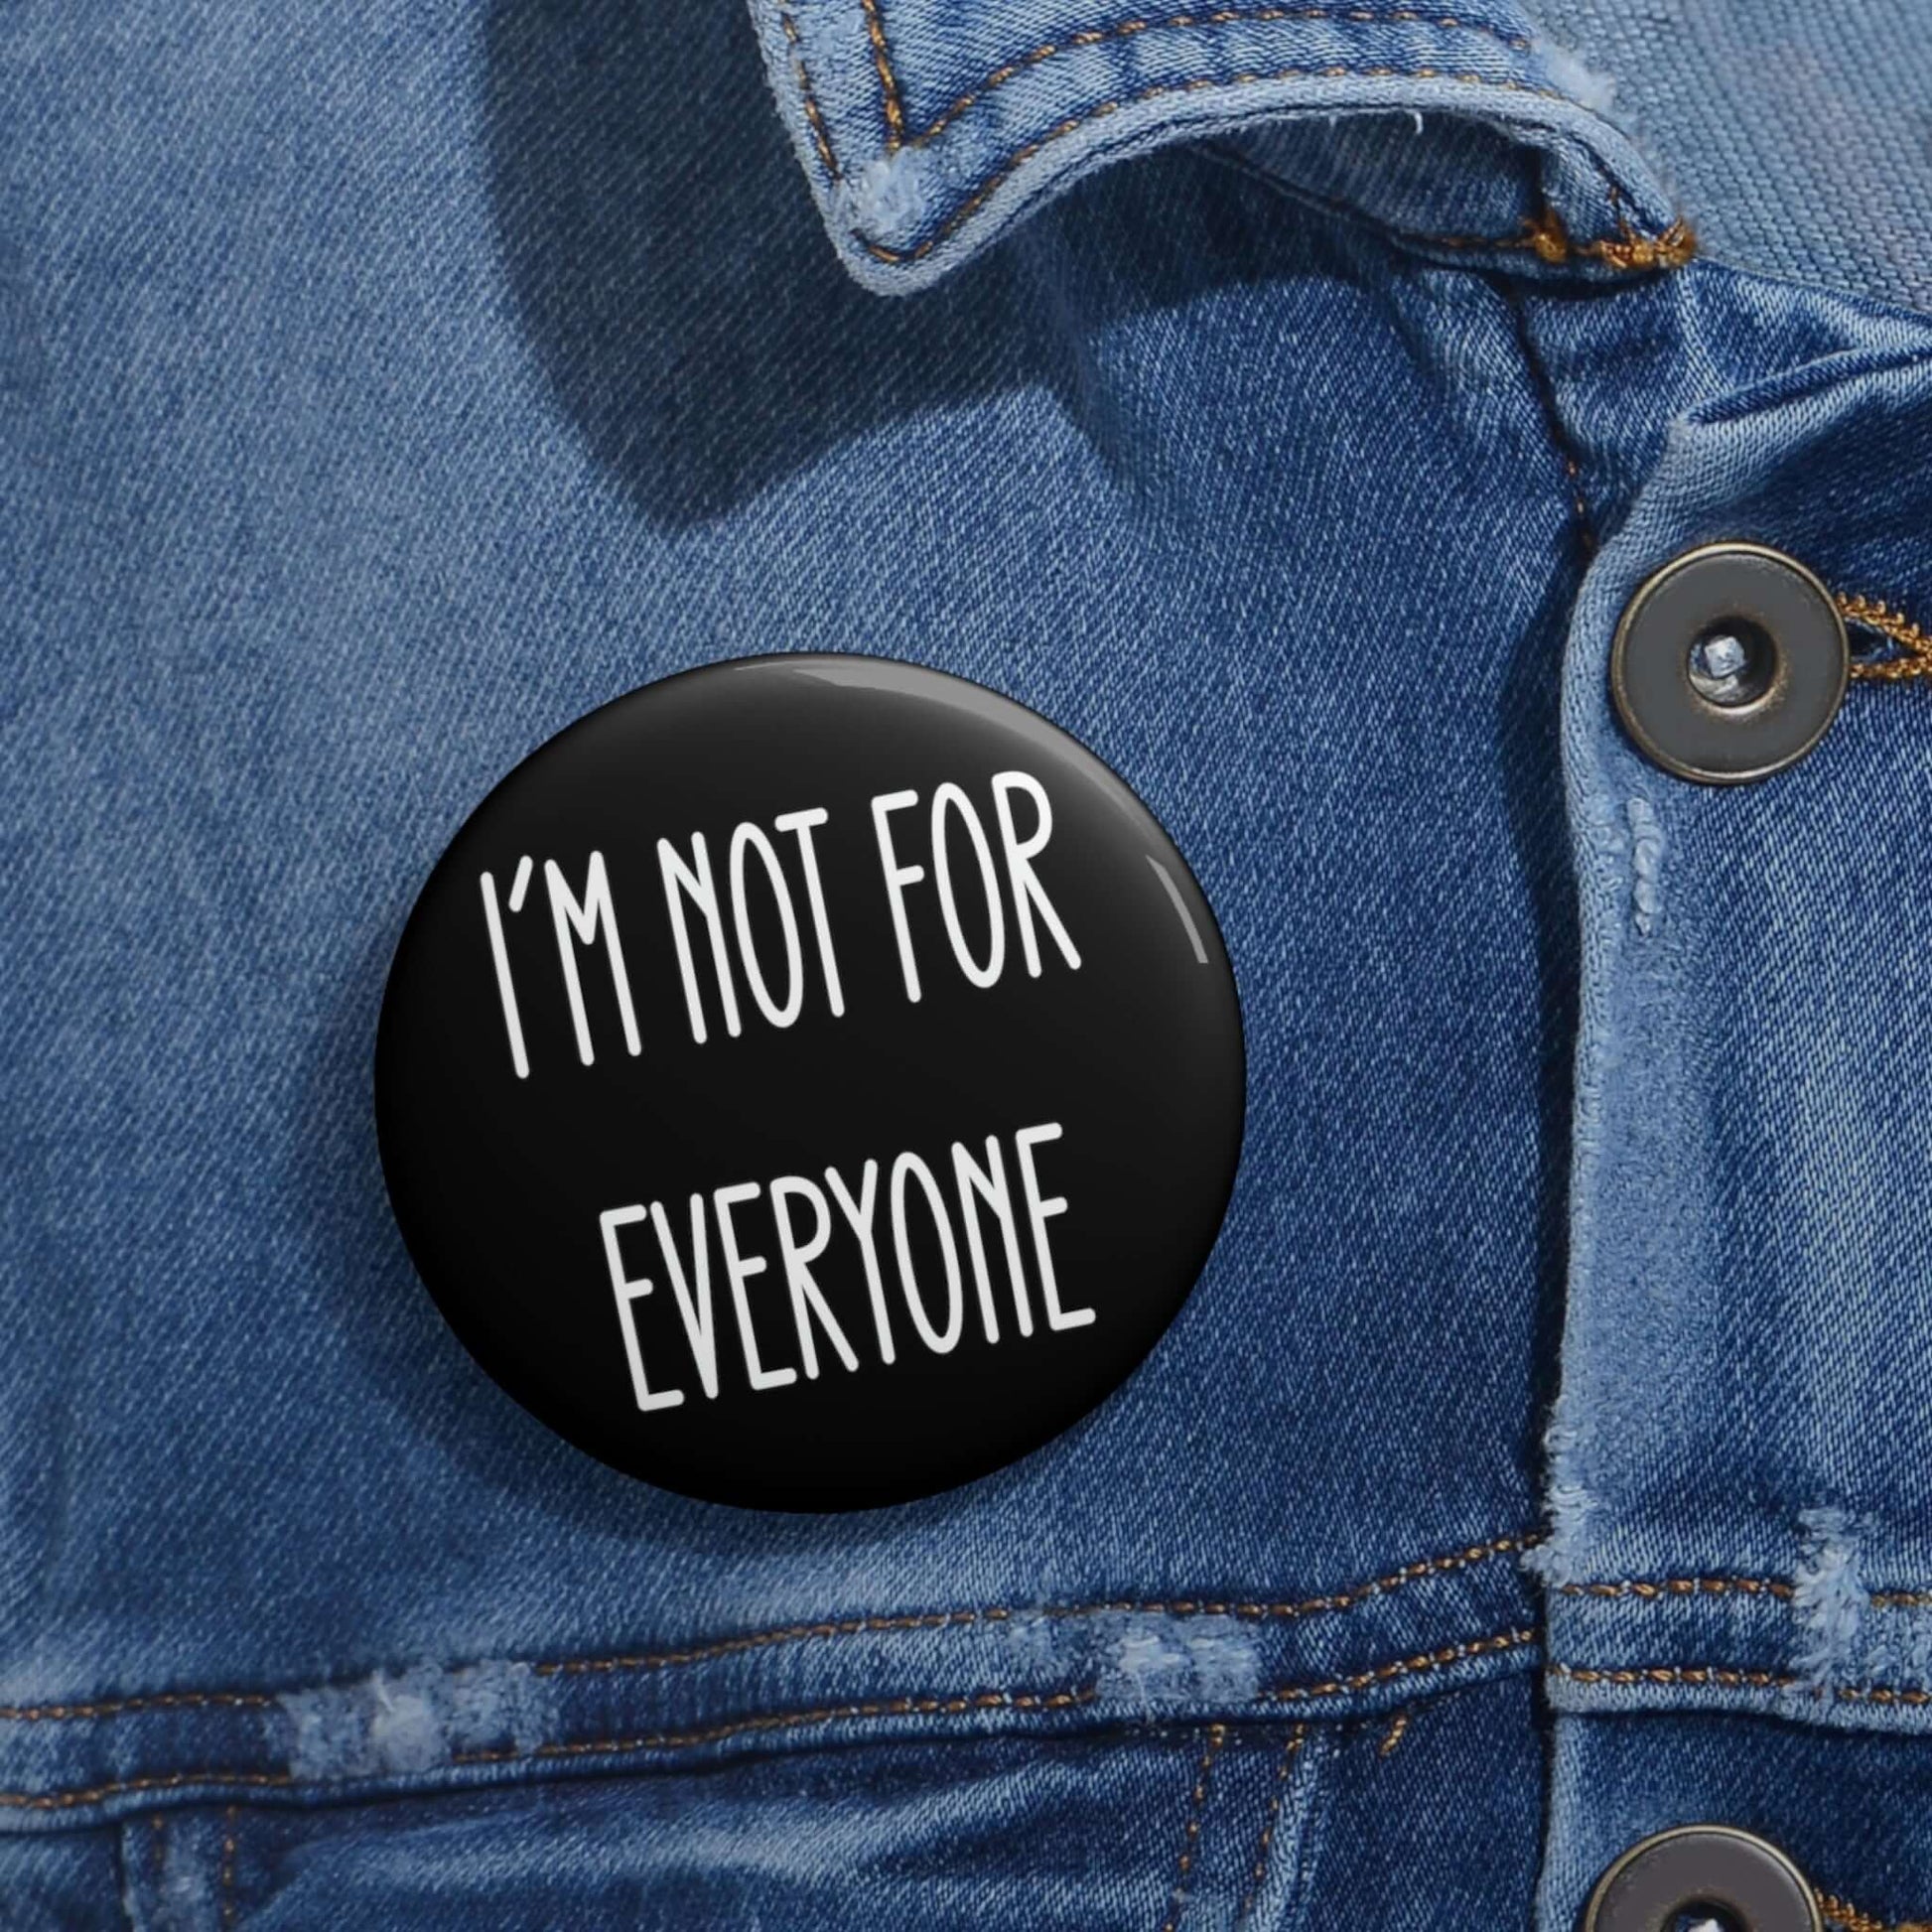 Pin-back button that says I'm not for everyone.